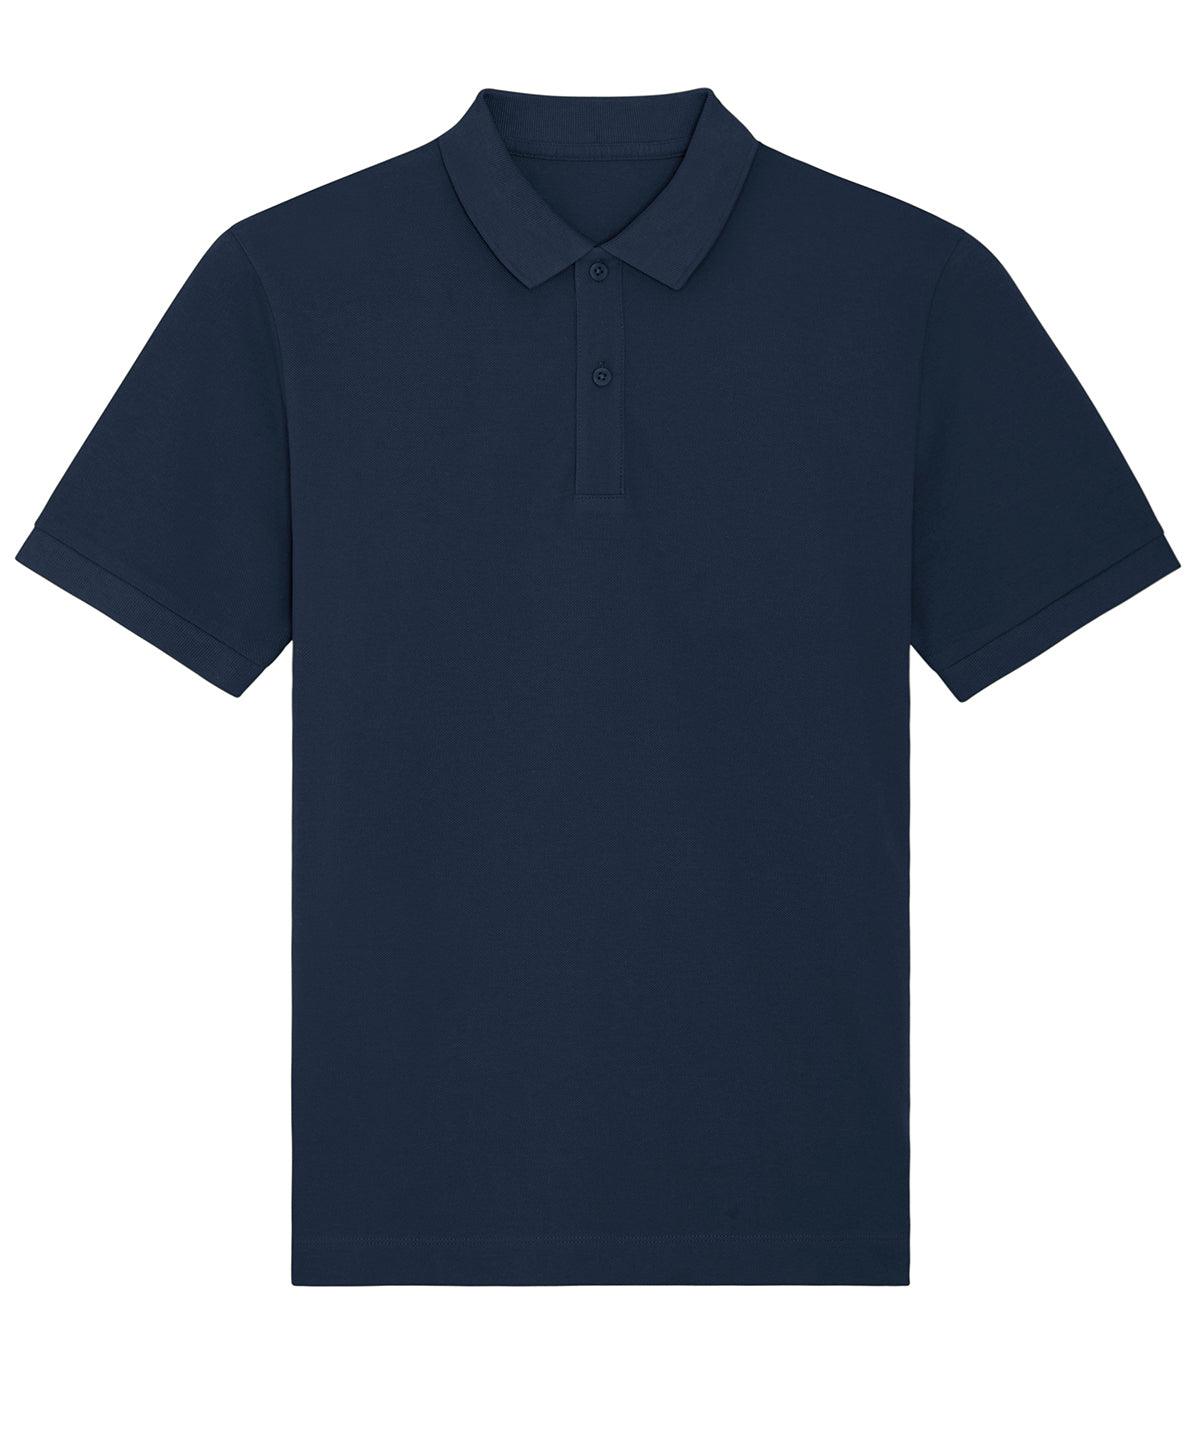 French Navy* - Prepster unisex short sleeve polo (STPU331) Polos Stanley/Stella Exclusives, New For 2021, New In Autumn Winter, New In Mid Year, Organic & Conscious, Polos & Casual, Raladeal - Stanley Stella, Stanley/ Stella Schoolwear Centres